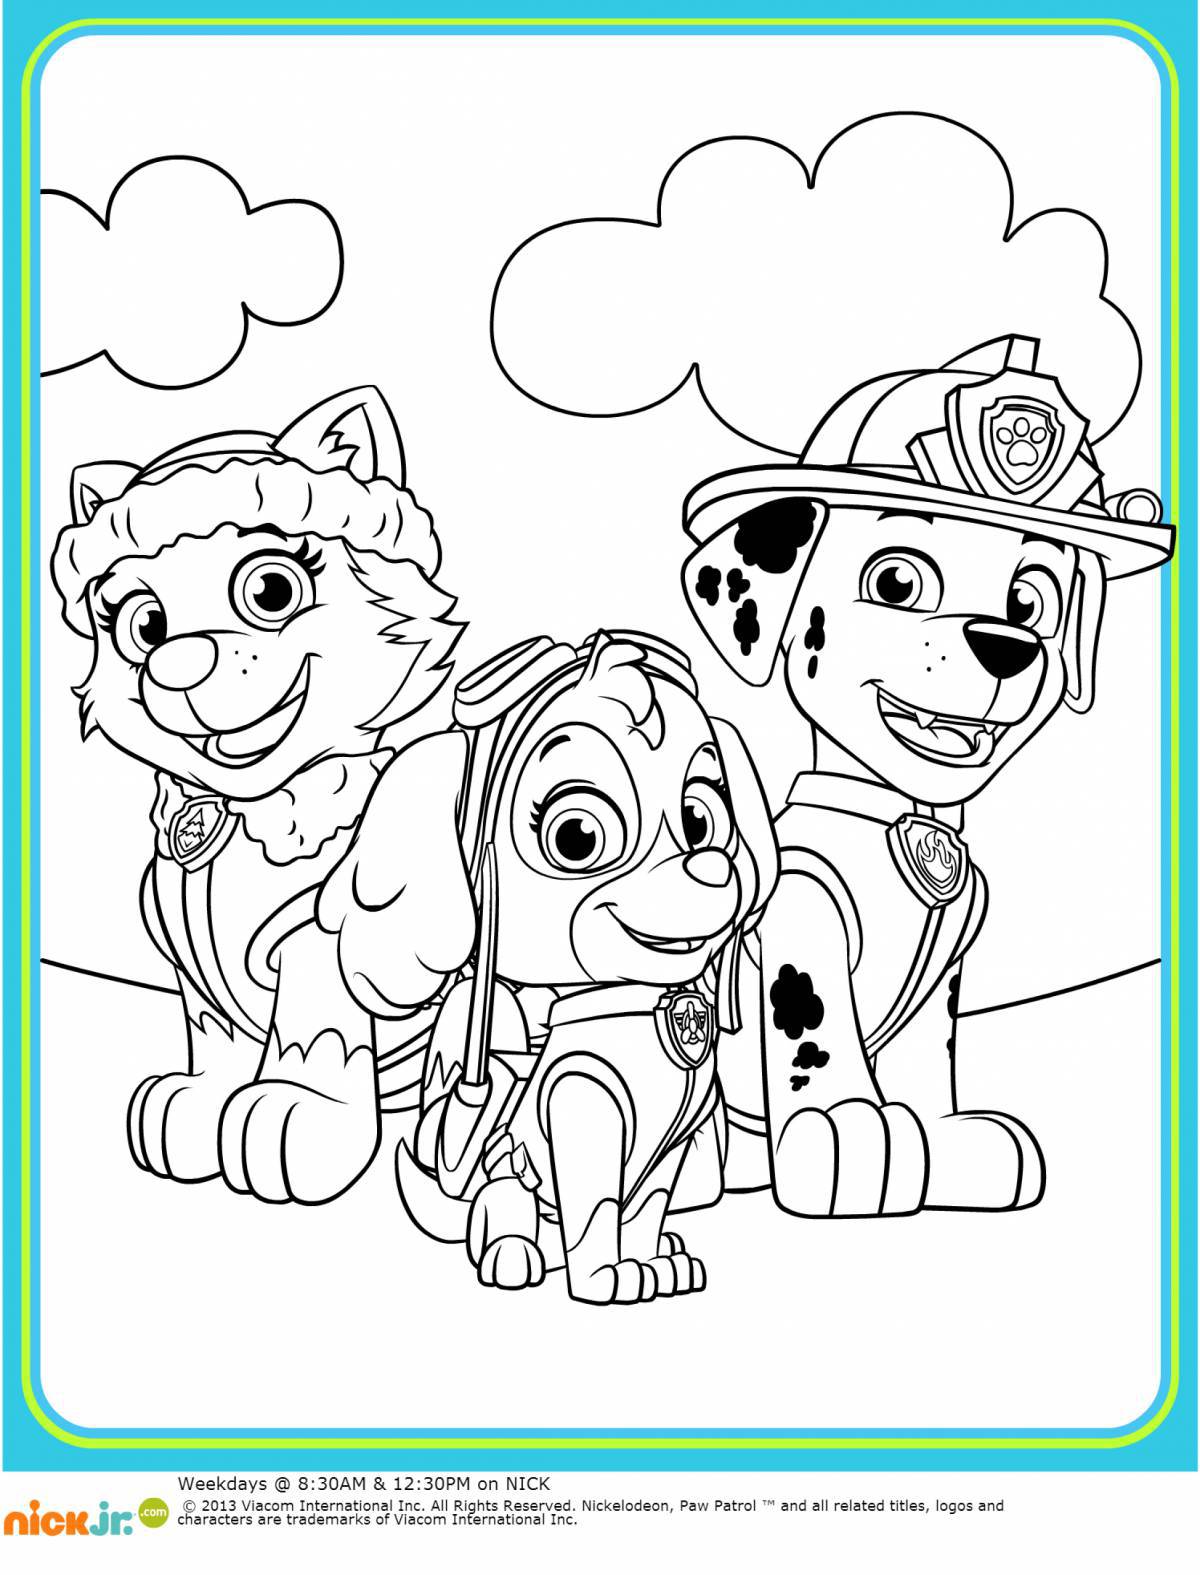 Adorable Paw Patrol coloring book for girls